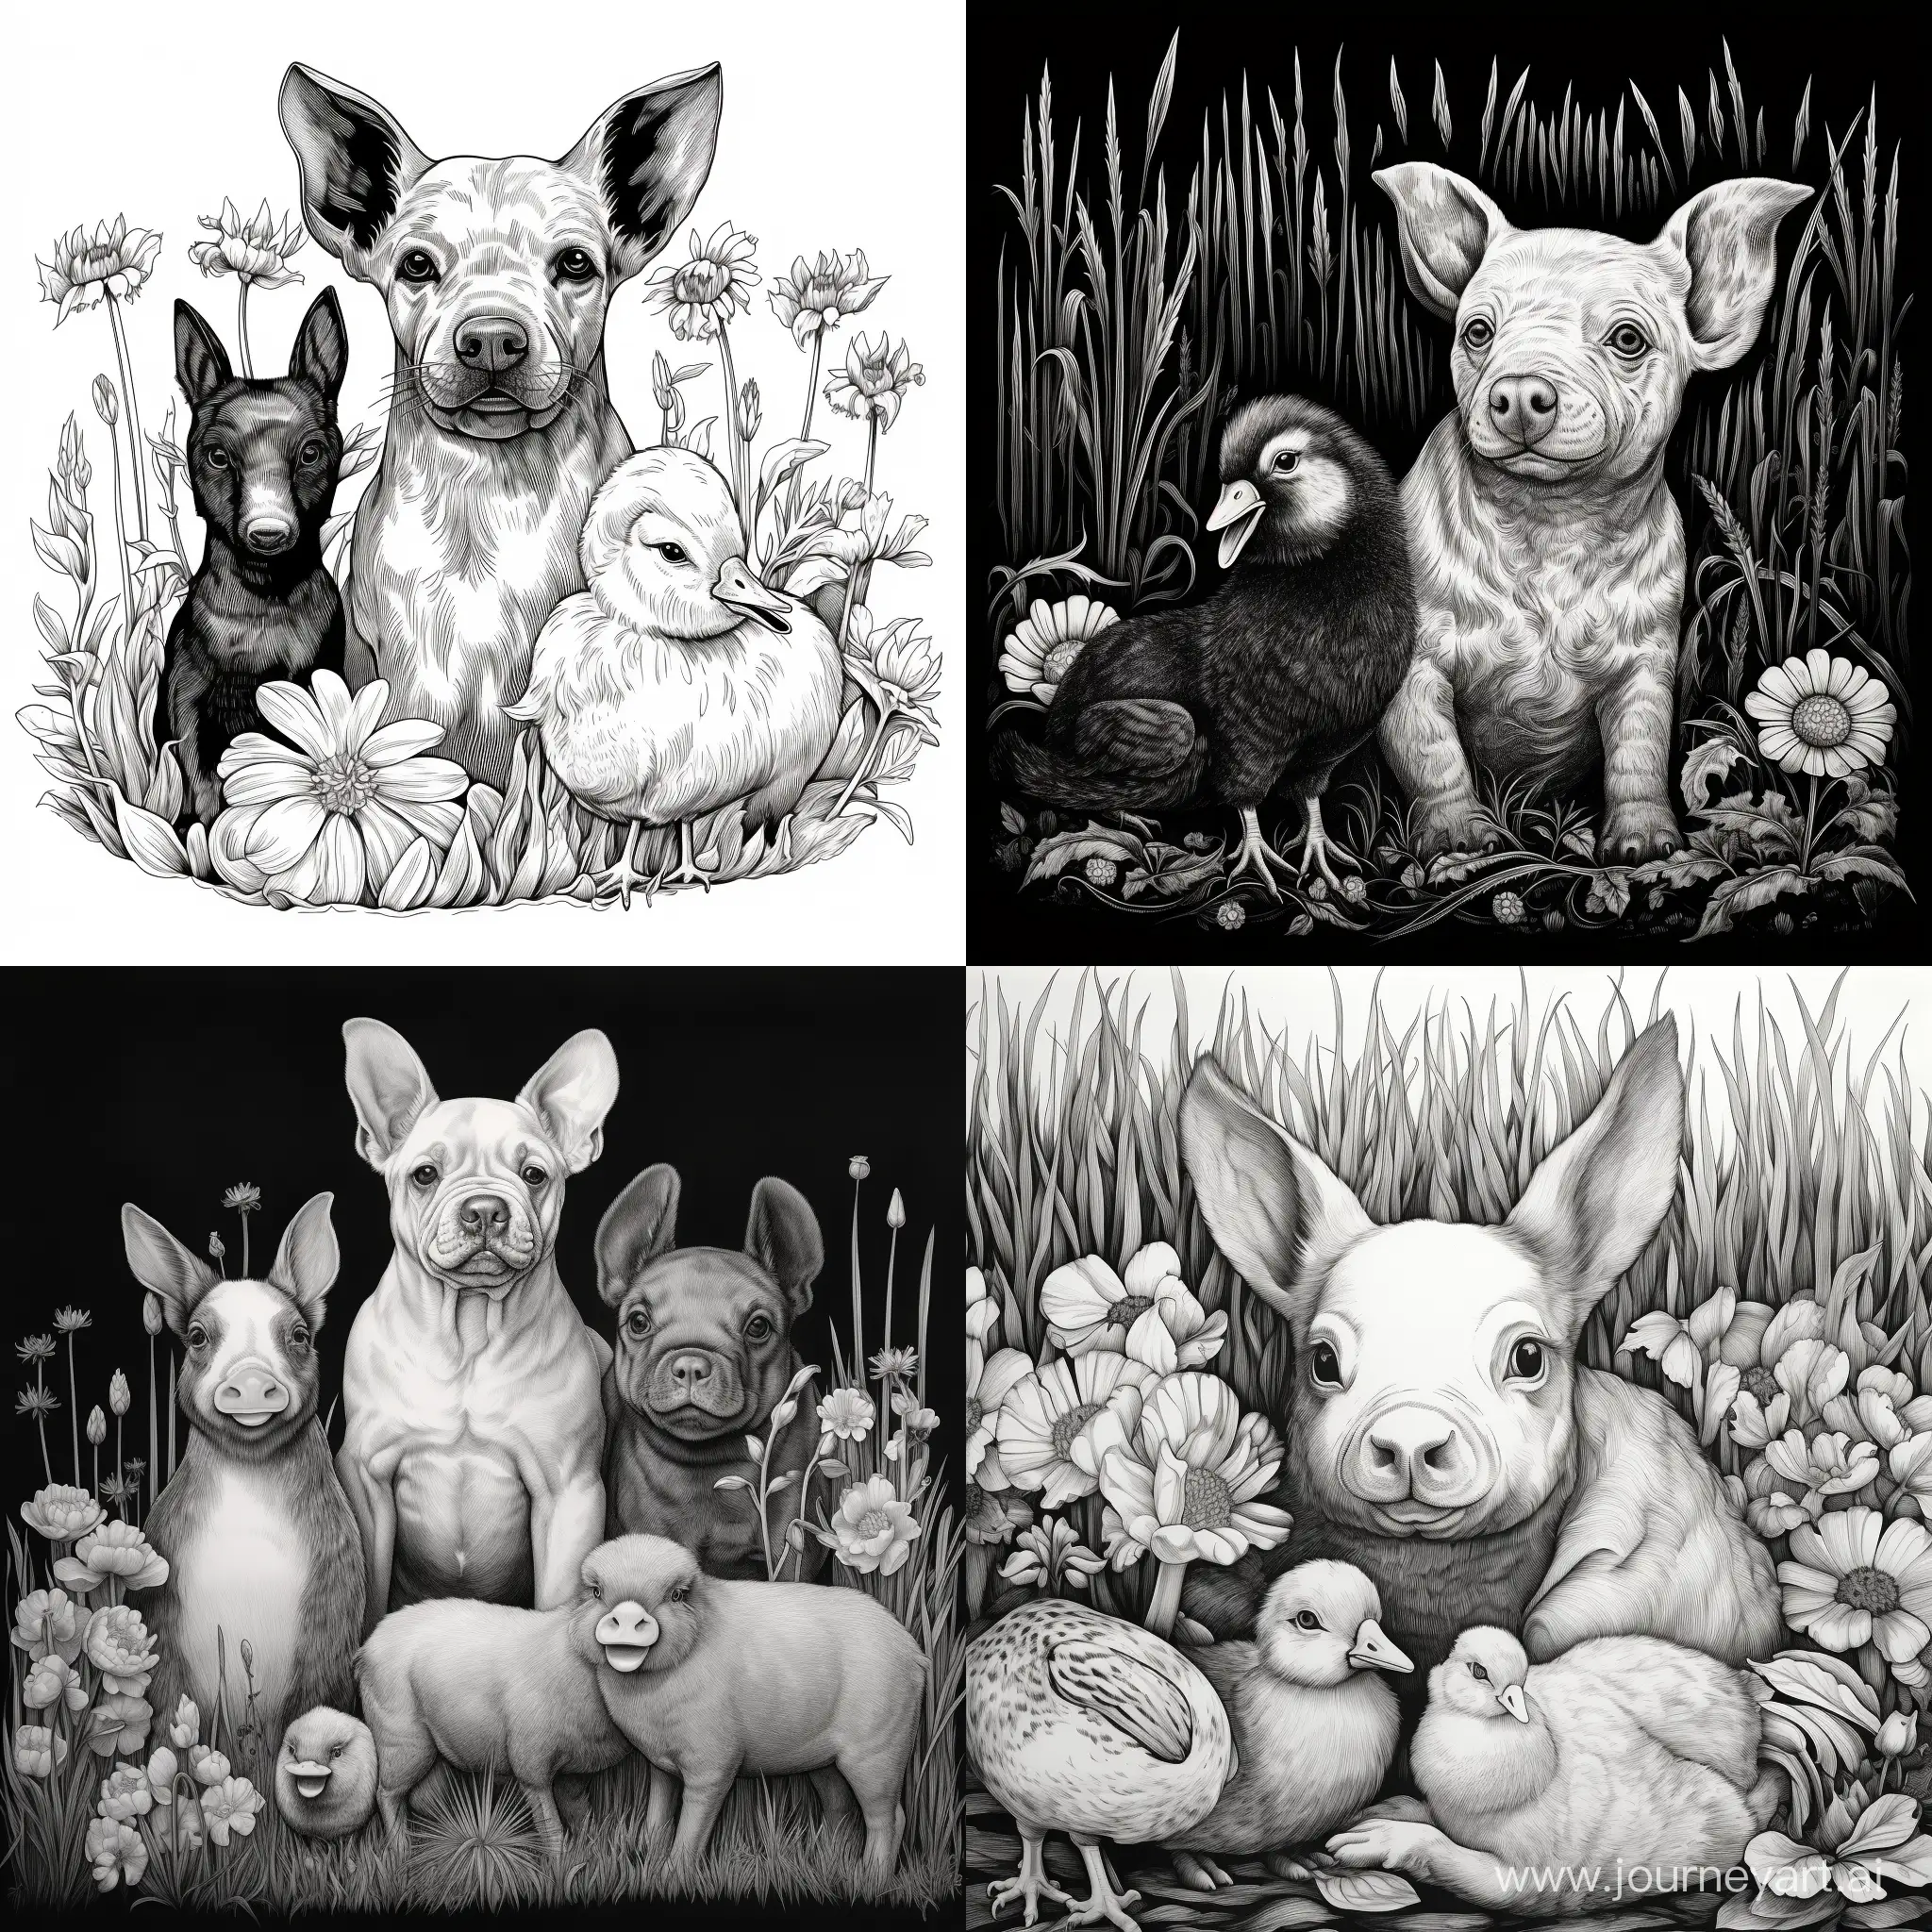 Pigs-and-Dogs-Caring-for-Little-Rabbit-in-Charming-Black-and-White